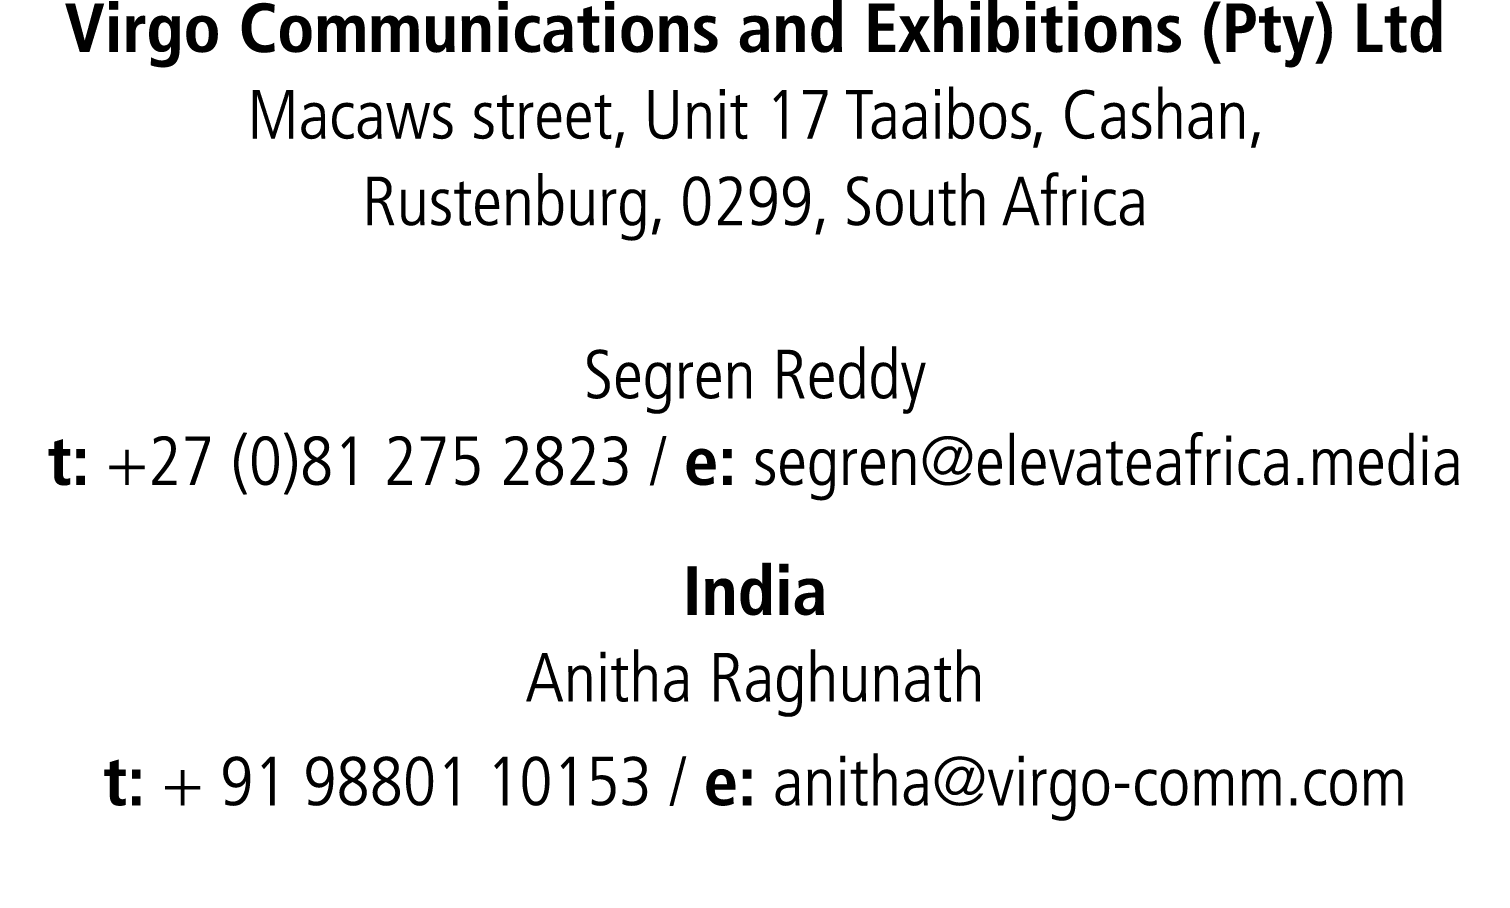 Virgo Communications and Exhibitions (Pty) Ltd Macaws street, Unit 17 Taaibos, Cashan, Rustenburg, 0299, South Africa...